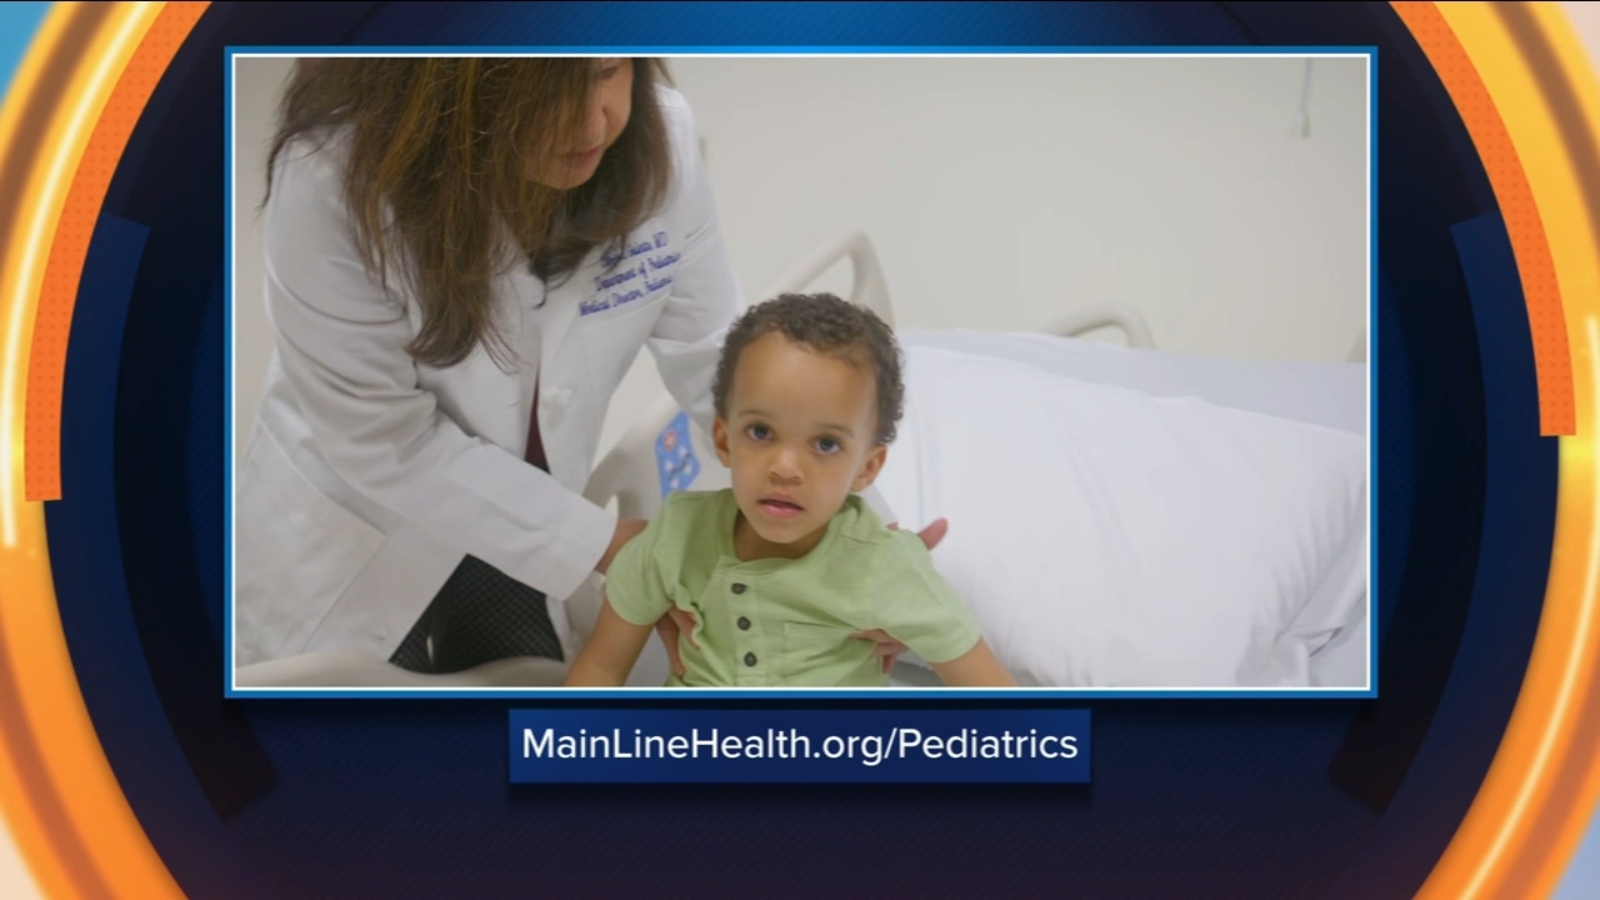 Learn about preventative pediatric care and emergency child care at Main Line Health [Video]